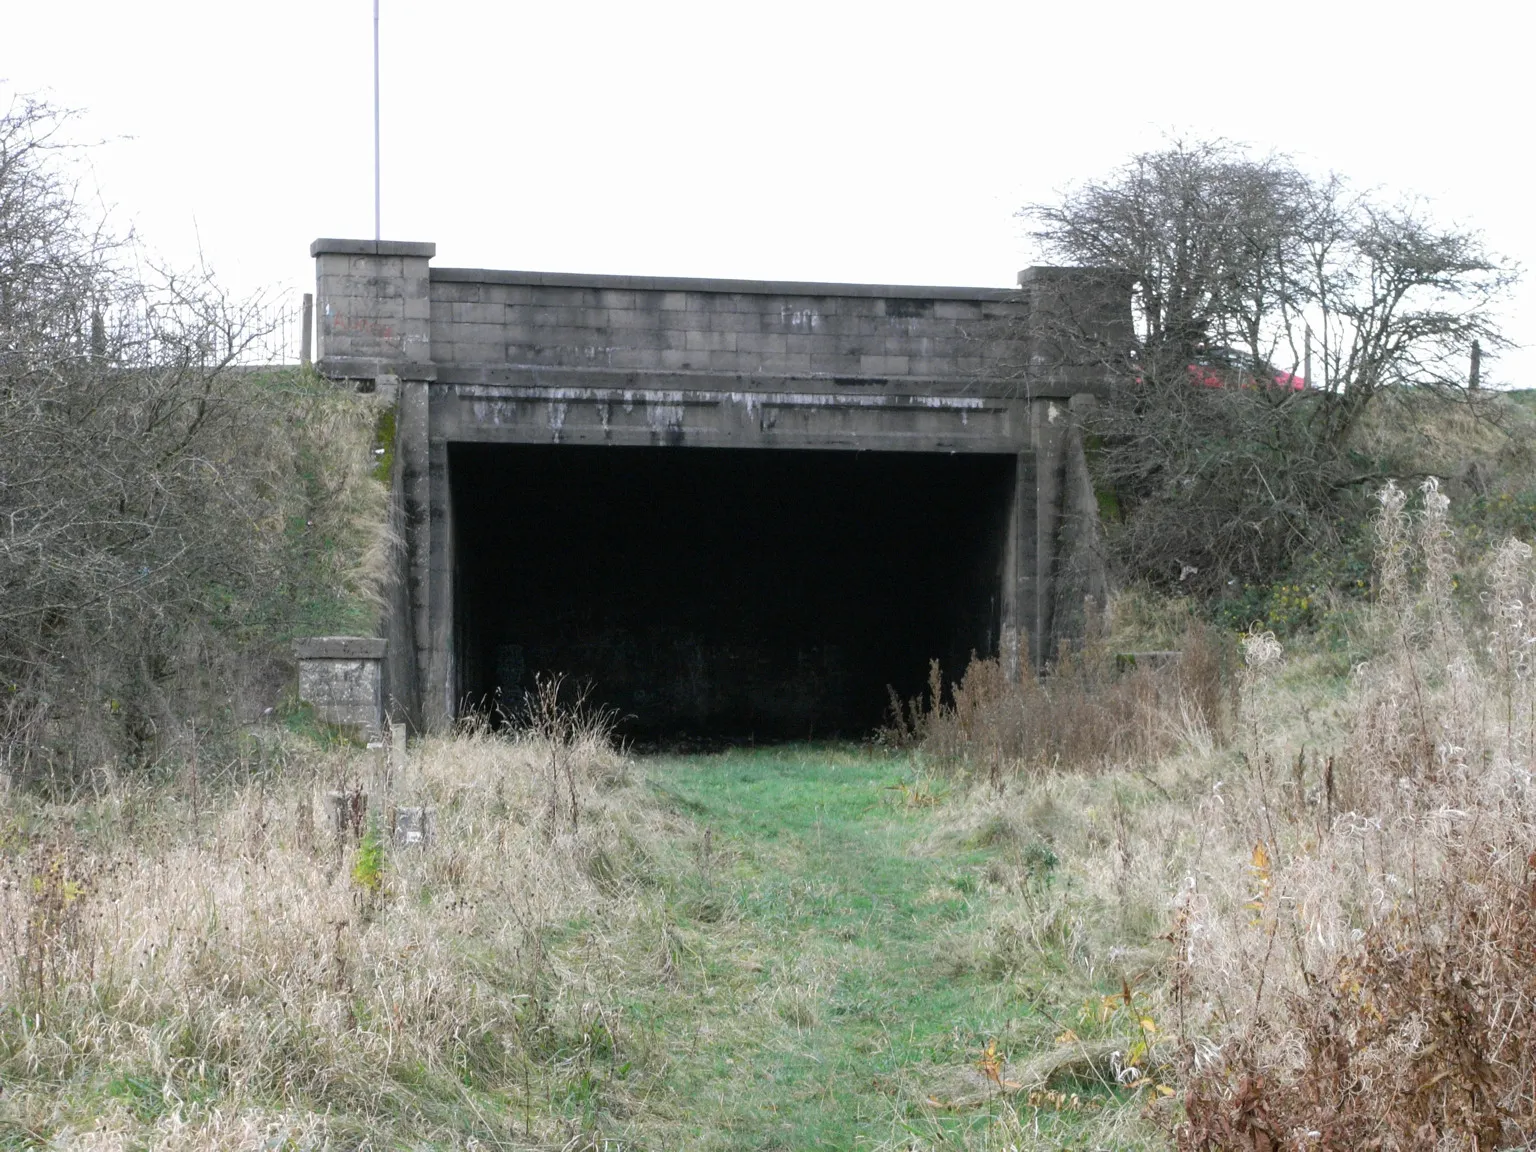 Photo showing: A bridge that was once part of the Darvel Branch railway line on the outskirts of Hurlford, East Ayrshire. The bridge has been filled in on one side. Photo by Dreamer84, taken on 6 November 2007.